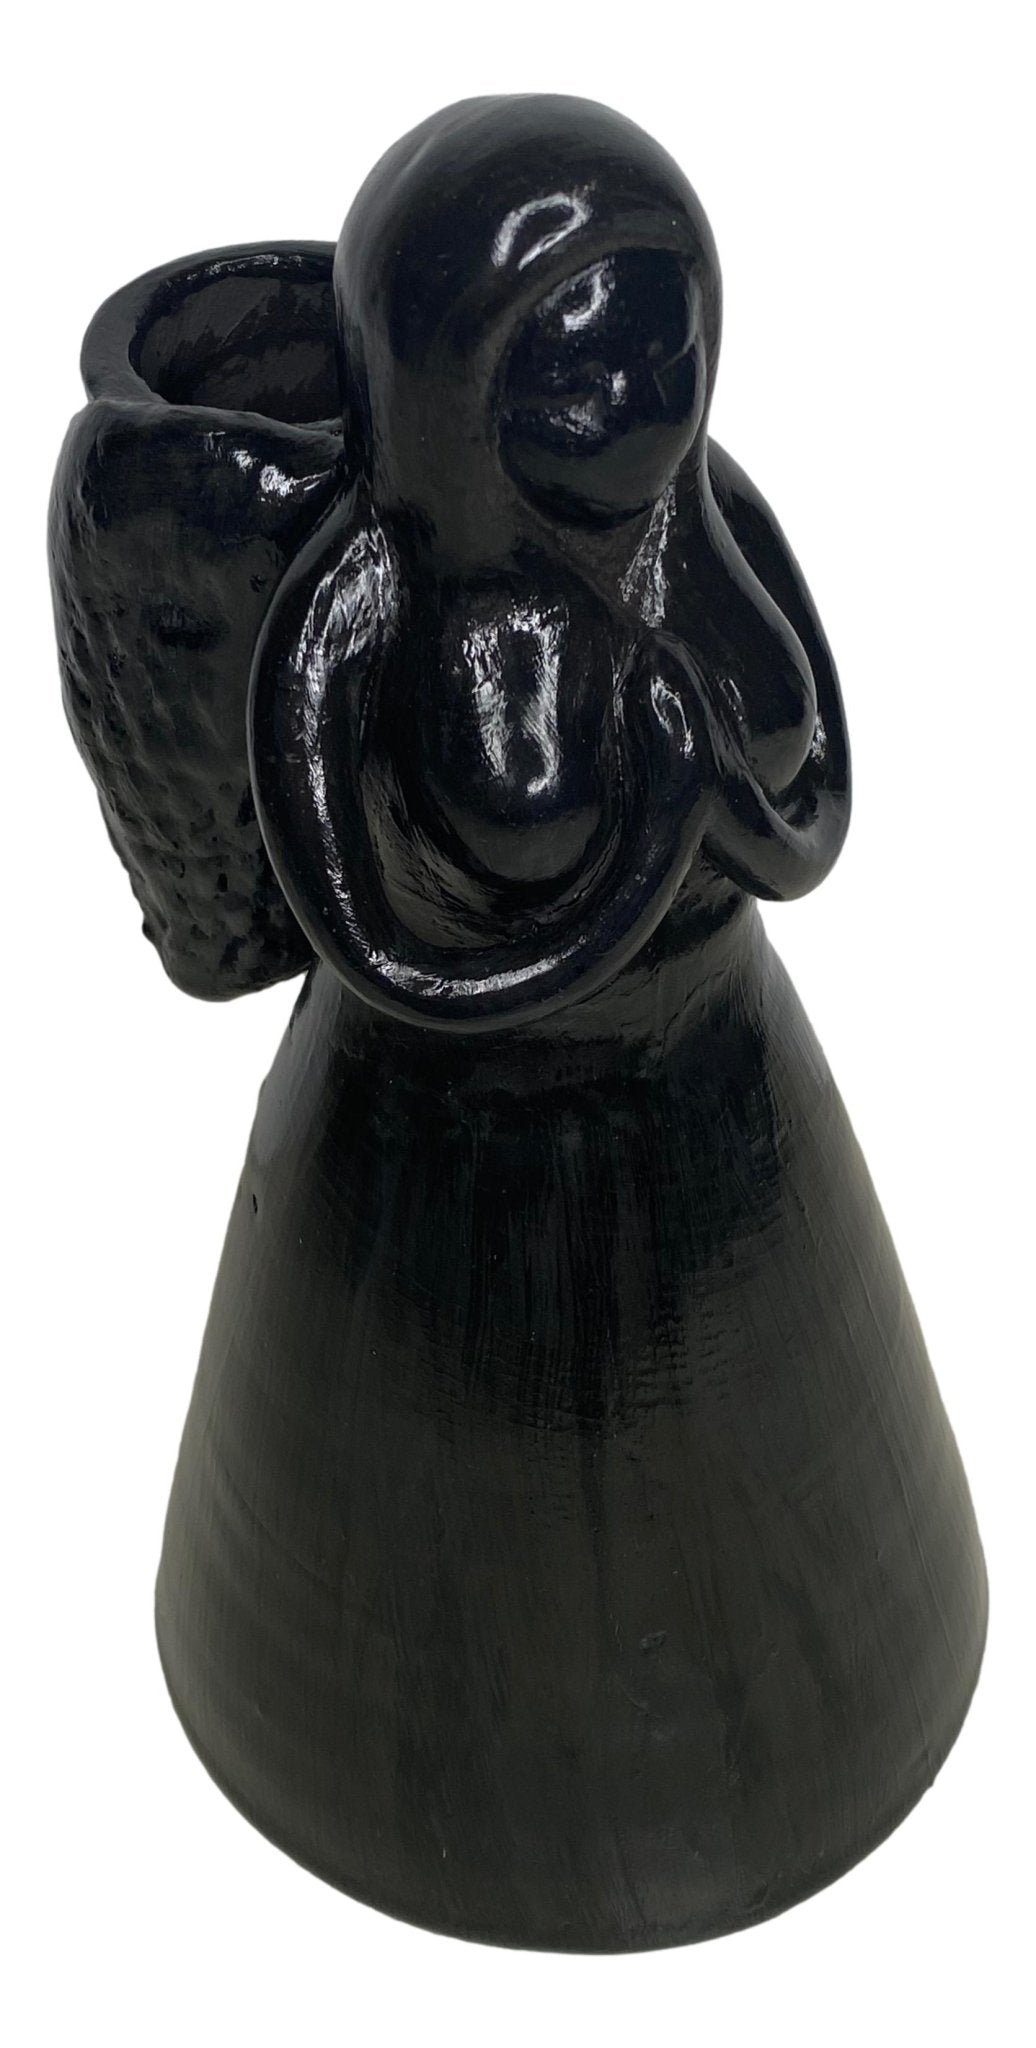 Candle Holder Statue Black Clay Praying Angel Handcrafted In Mexico 4 3/4 L X 5 W X 8 1/2 H Inches Inches - Ysleta Mission Gift Shop- VOTED 2022 El Paso's Best Gift Shop